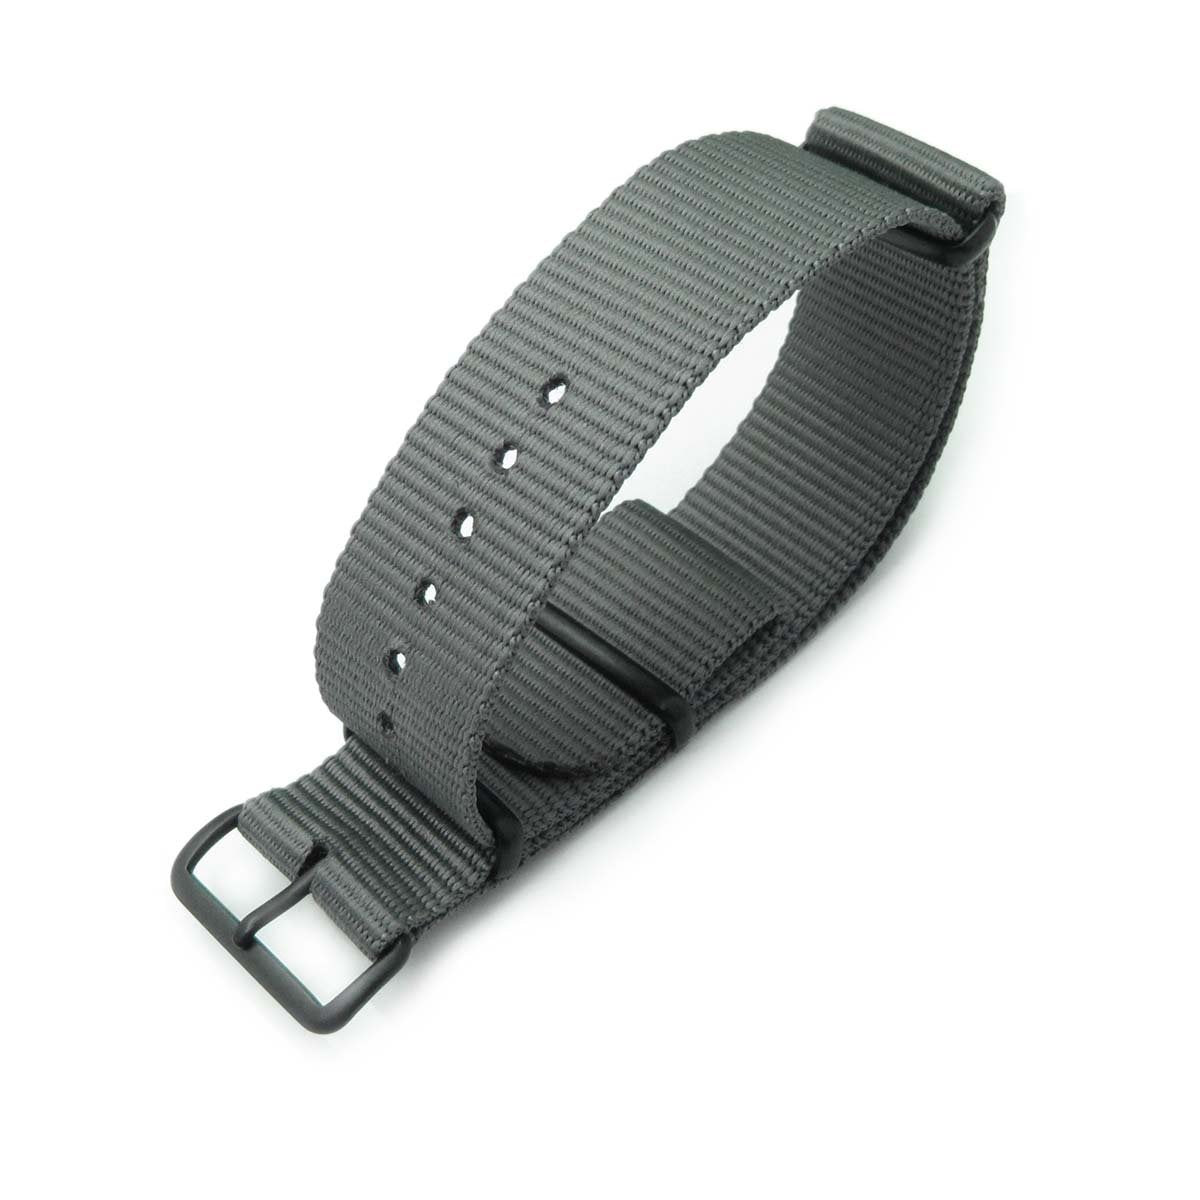 MiLTAT 22mm G10 Military Watch Strap Ballistic Nylon Armband PVD Military Grey Strapcode Watch Bands